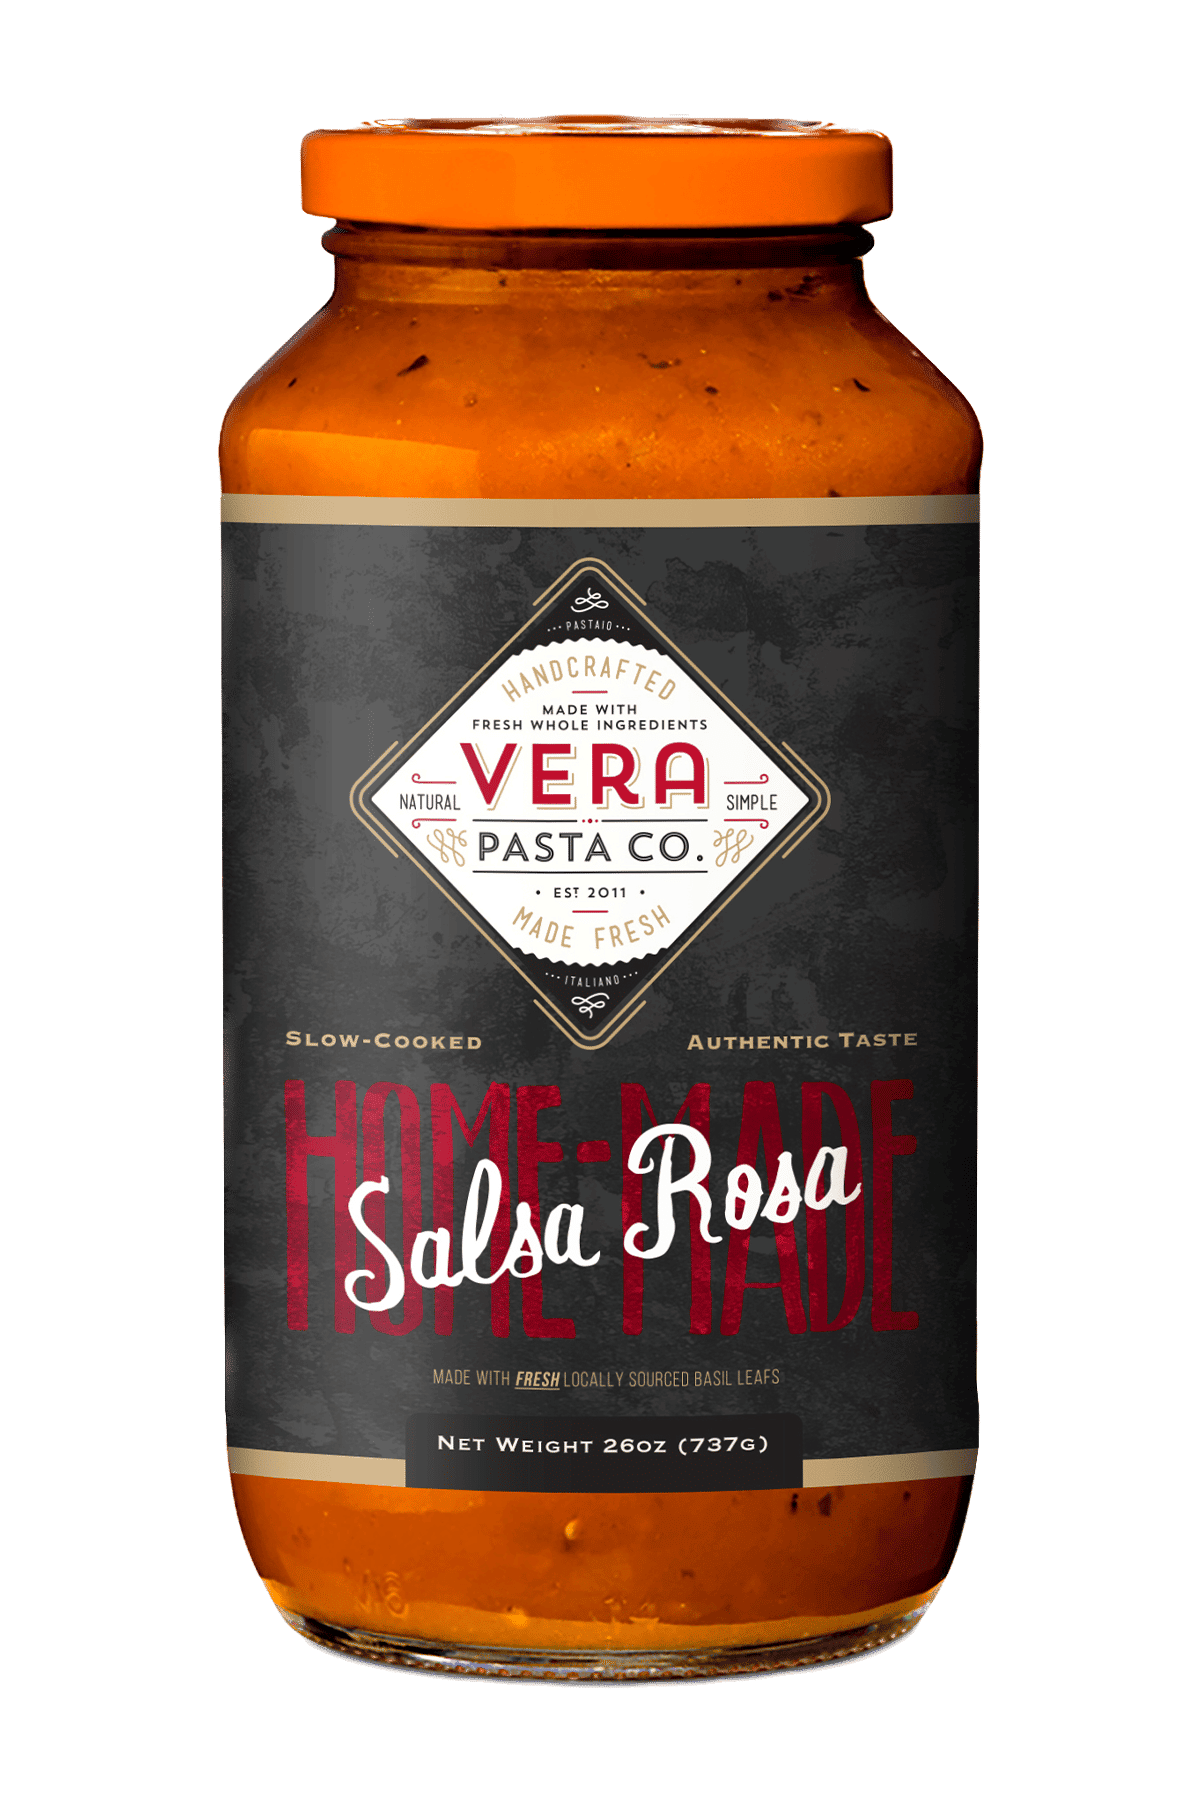 Salsa Rosa - The Pink Spanish Cocktail Sauce - Oh, The Things We'll Make!